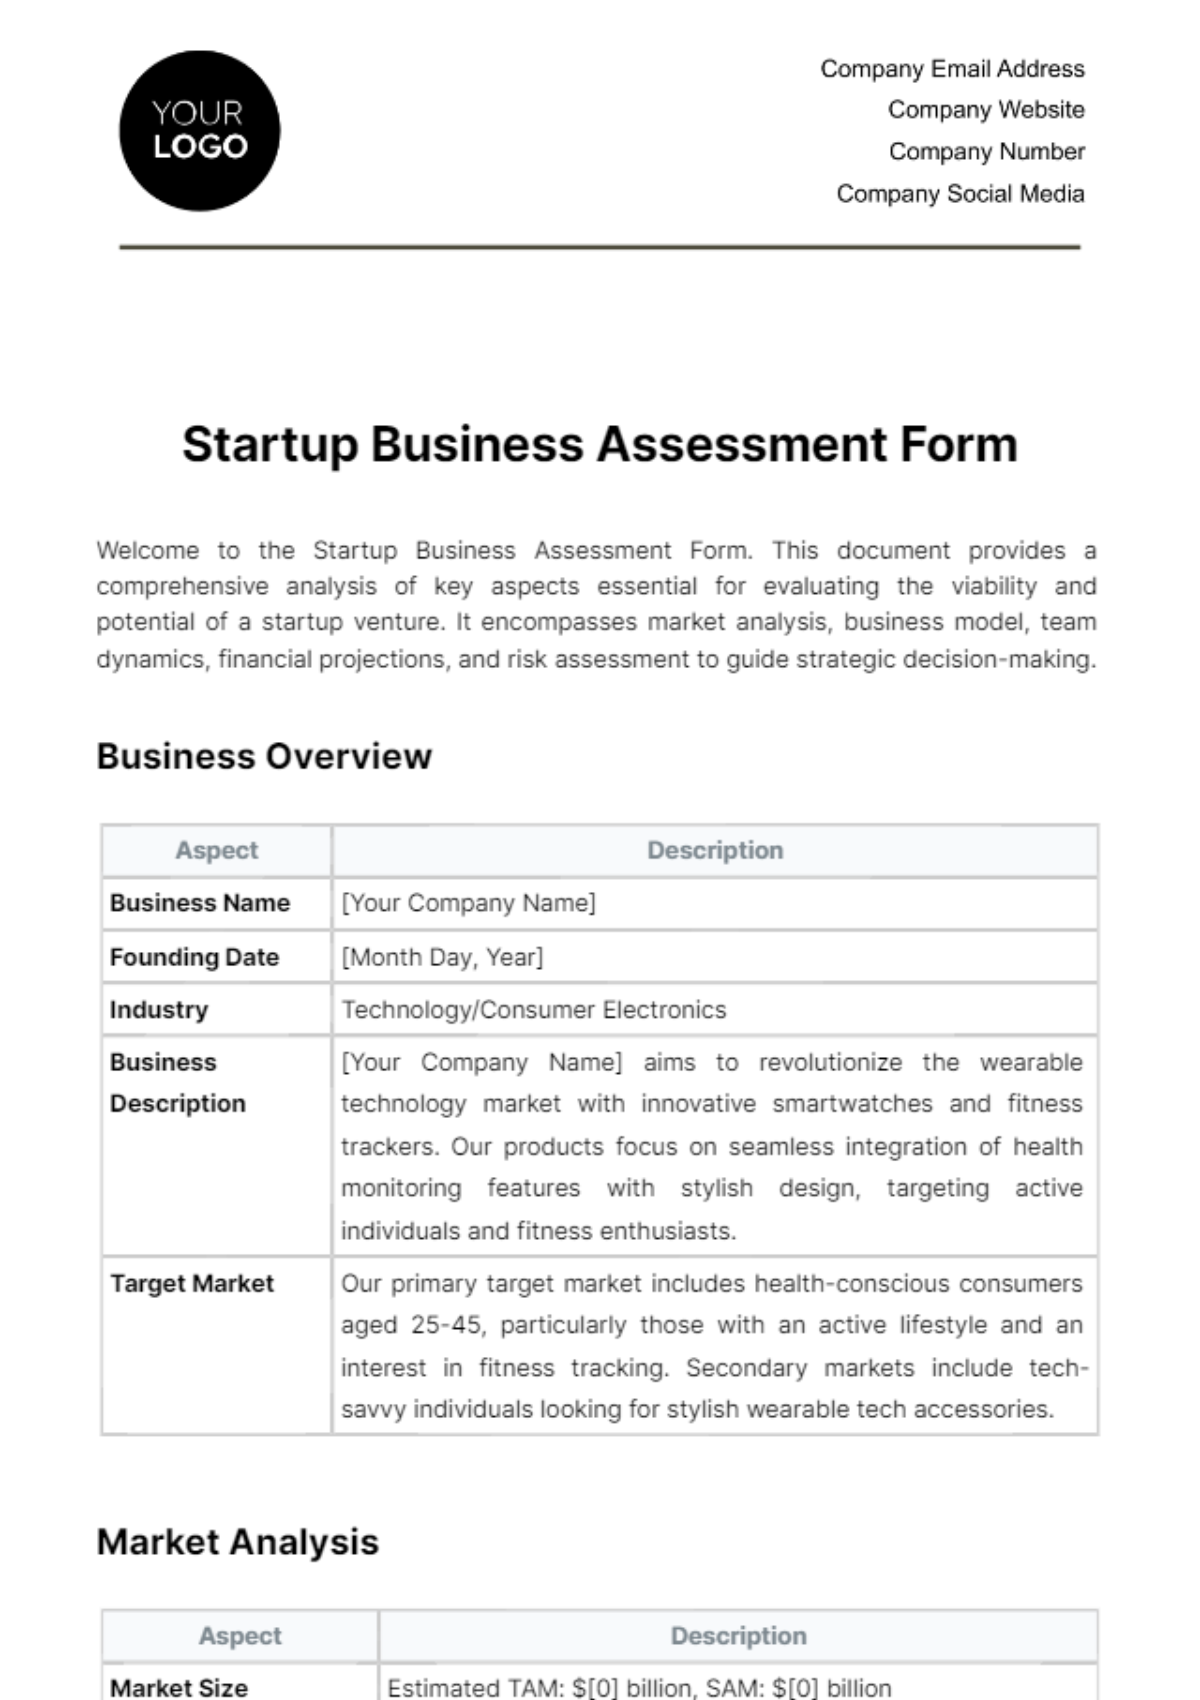 Free Startup Business Assessment Form Template